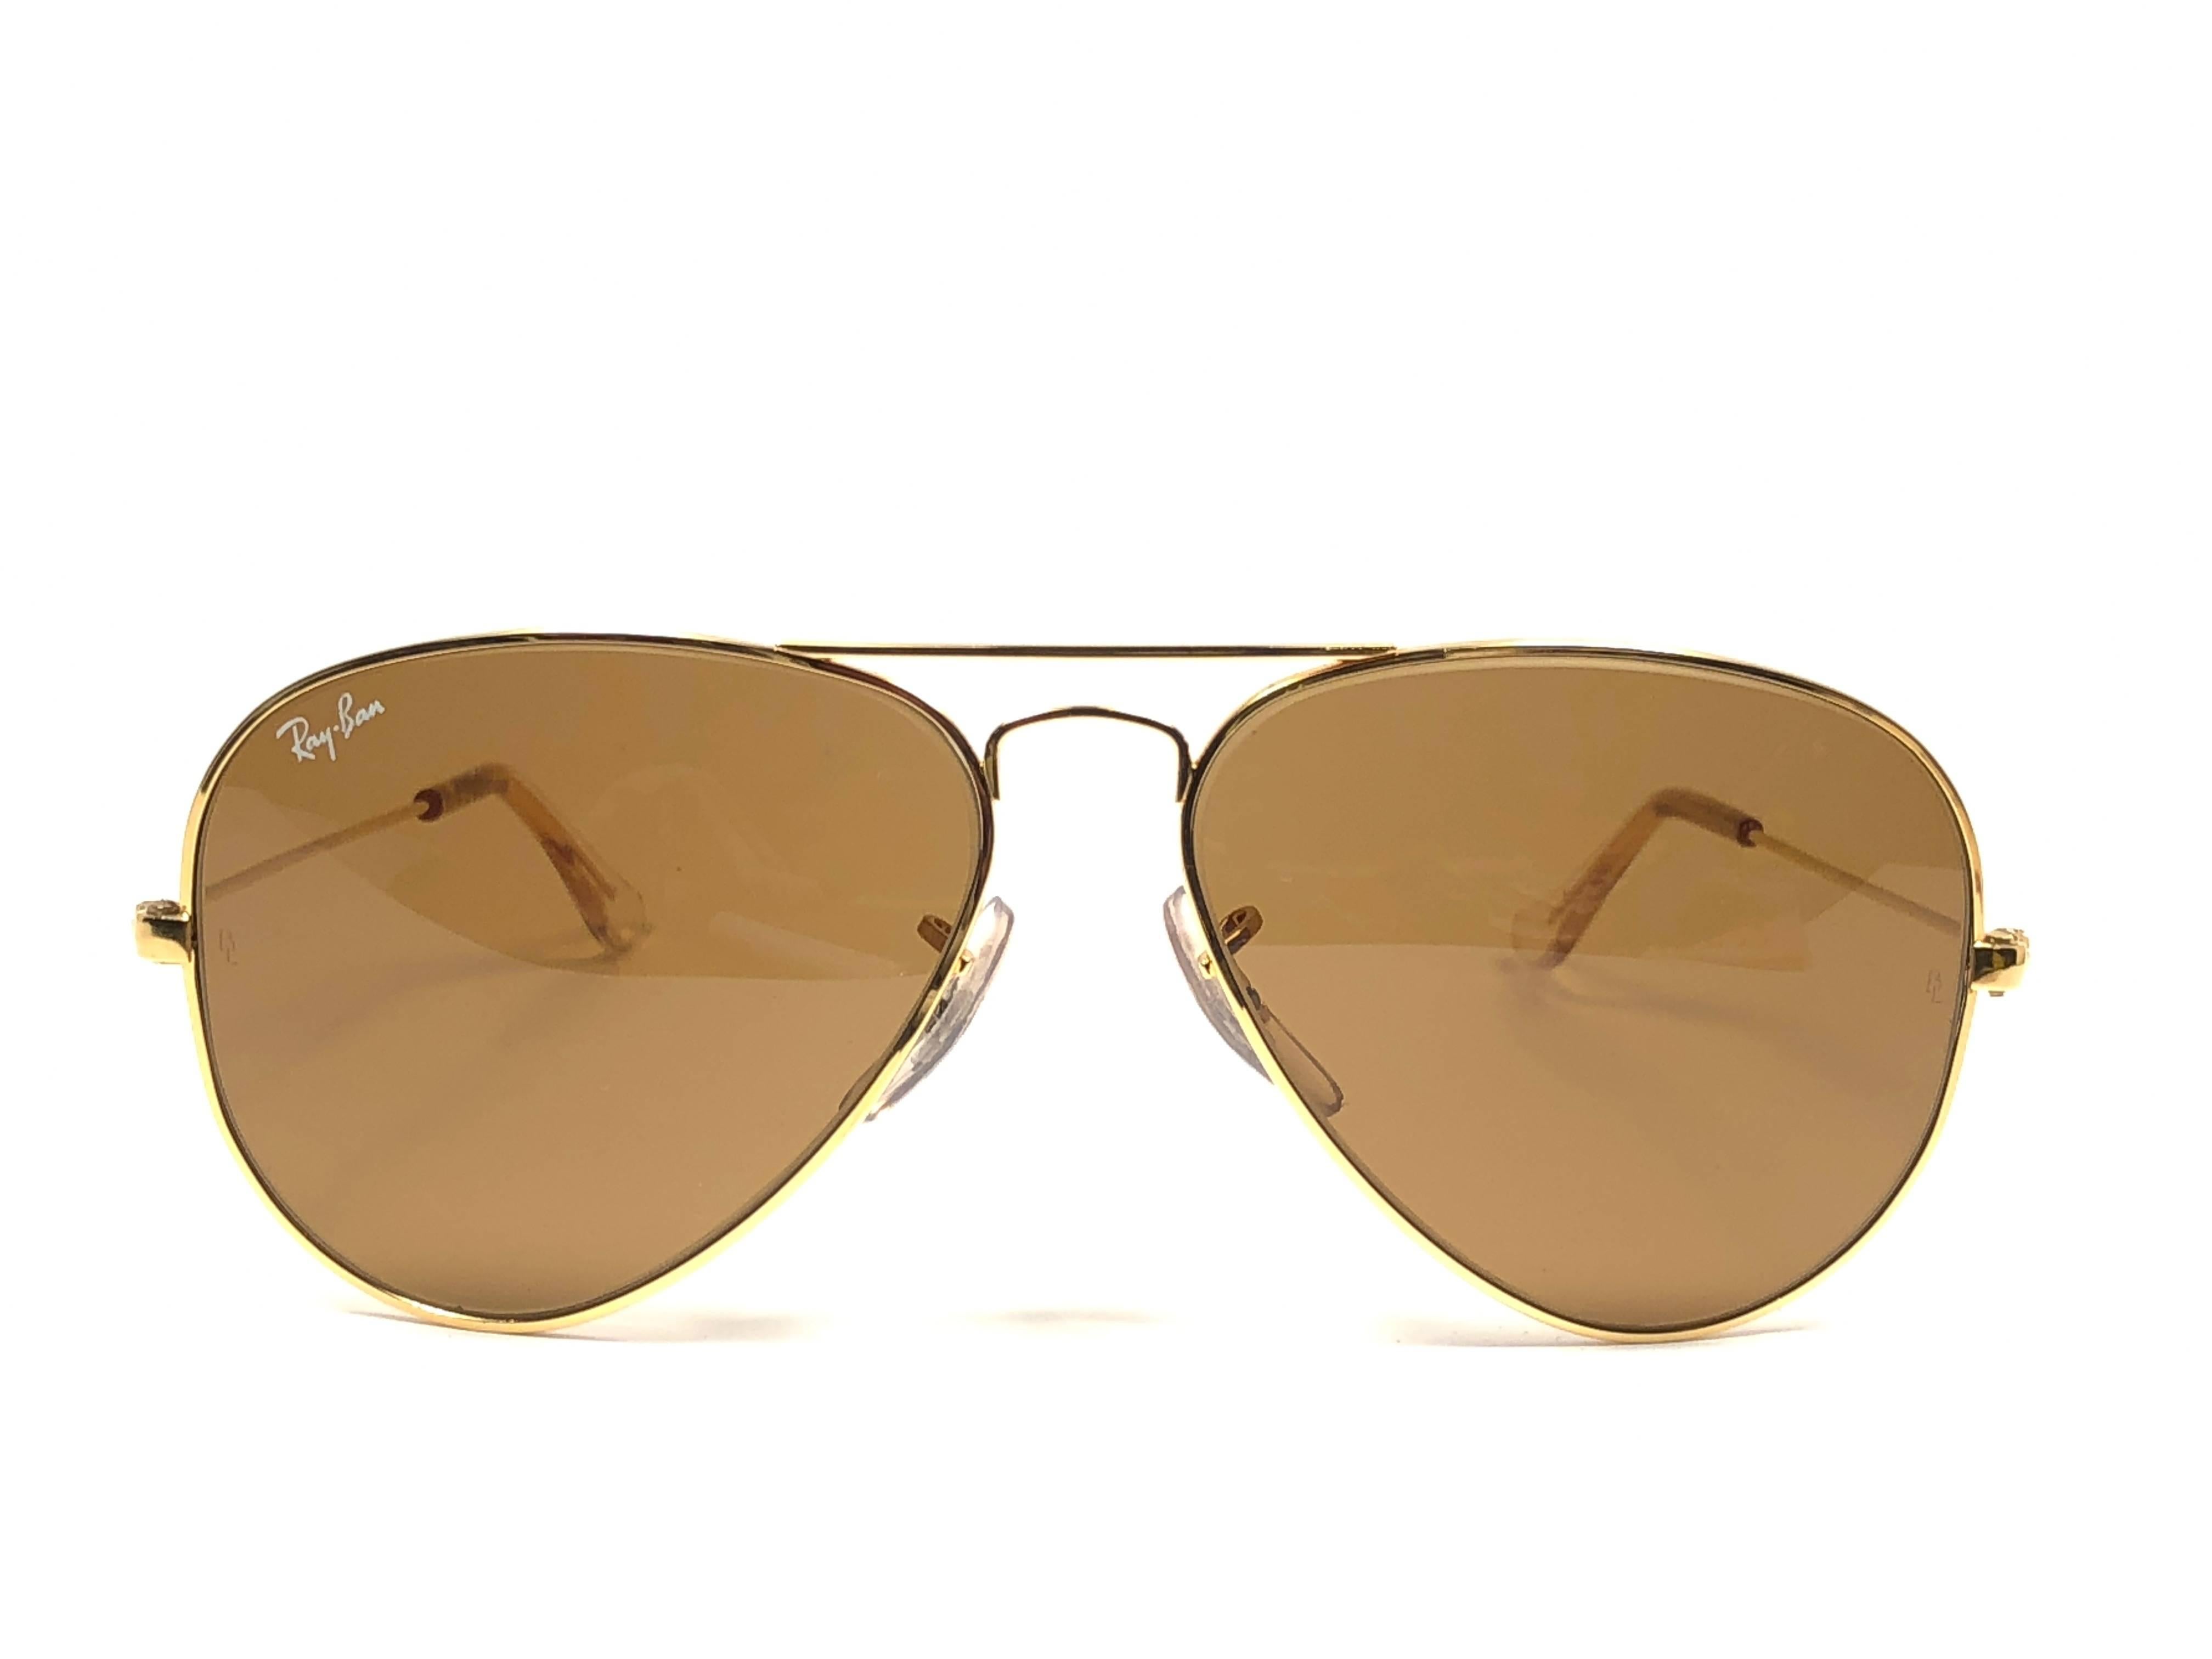 New Super special vintage Ray Ban Aviator Gold frame with B&L B15 Brown Lenses in SIZE 58!! Amazing top gradient mirror lenses.
Comes with its original Ray Ban B&L case. 
Rare and hard to find in this new, never worn or displayed condition. This